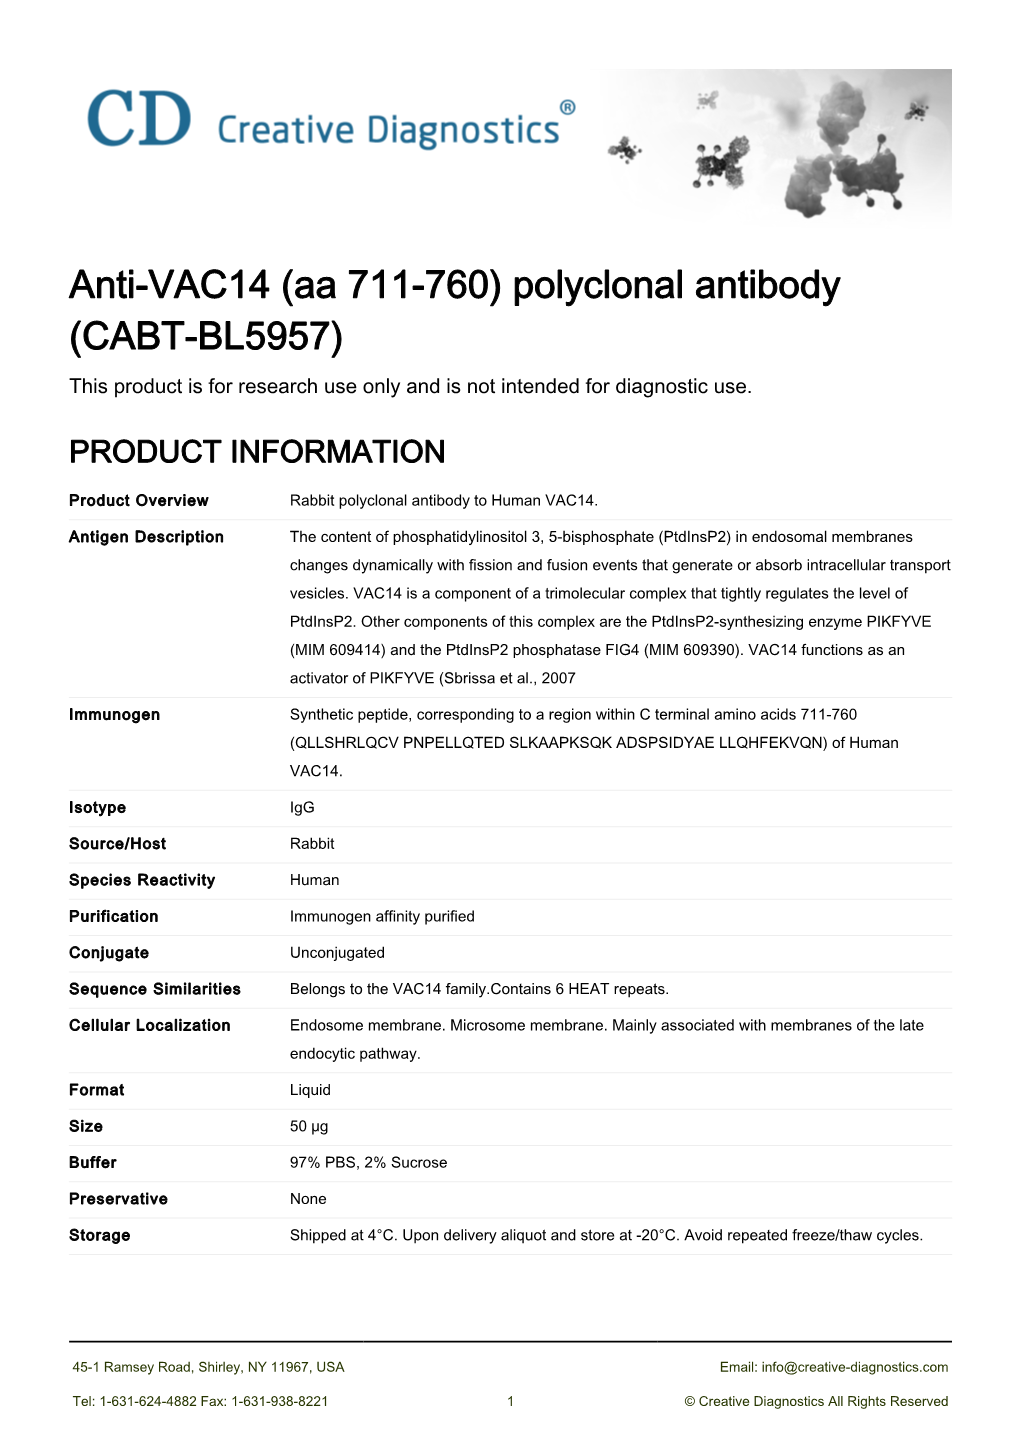 Anti-VAC14 (Aa 711-760) Polyclonal Antibody (CABT-BL5957) This Product Is for Research Use Only and Is Not Intended for Diagnostic Use